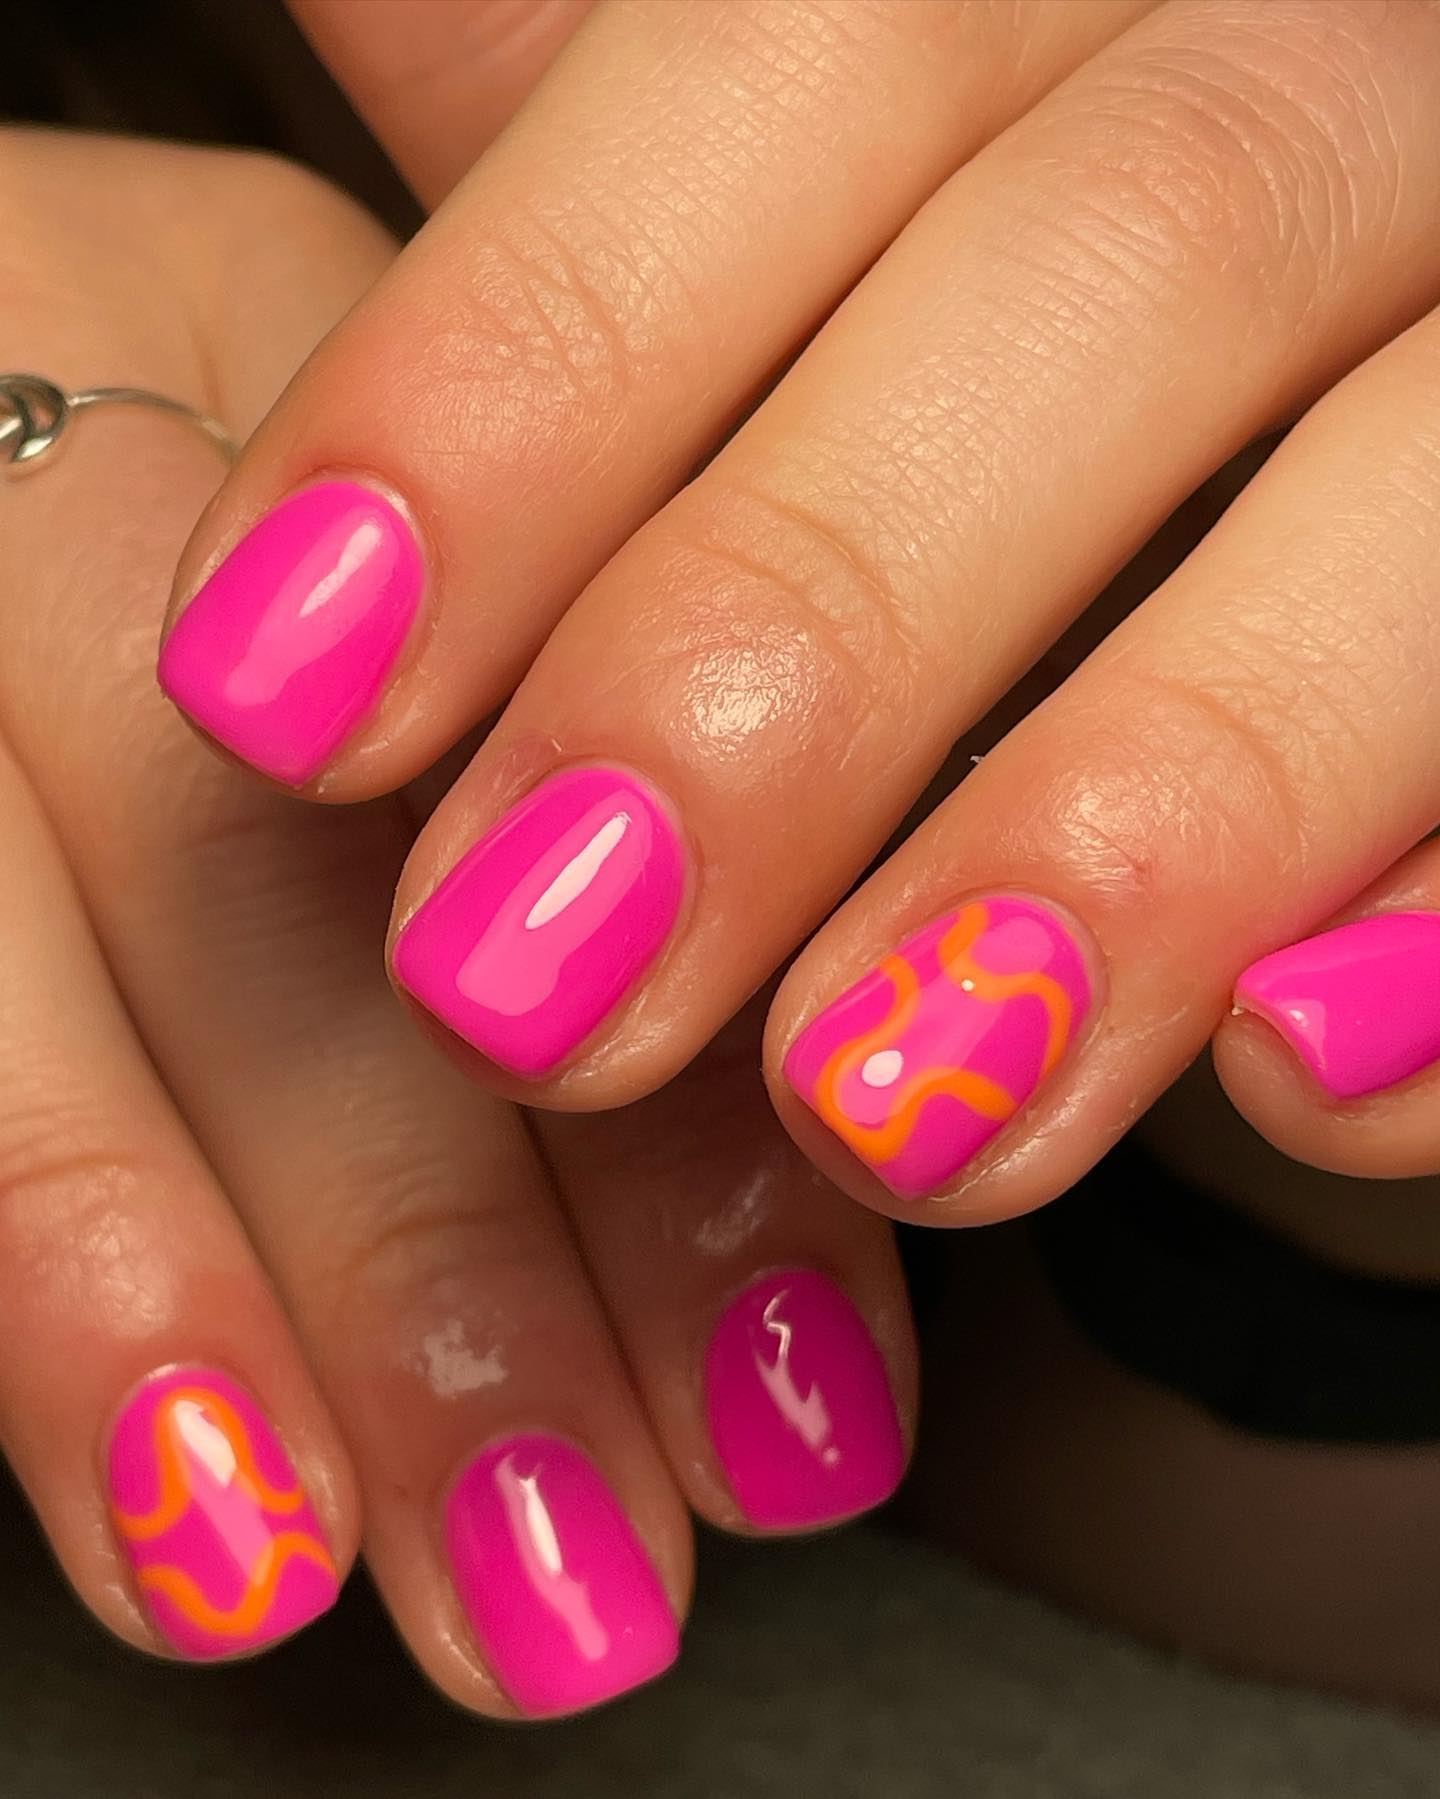 Celebrate Summer With These Cute Nail Art Designs : Swirl Pink Nails